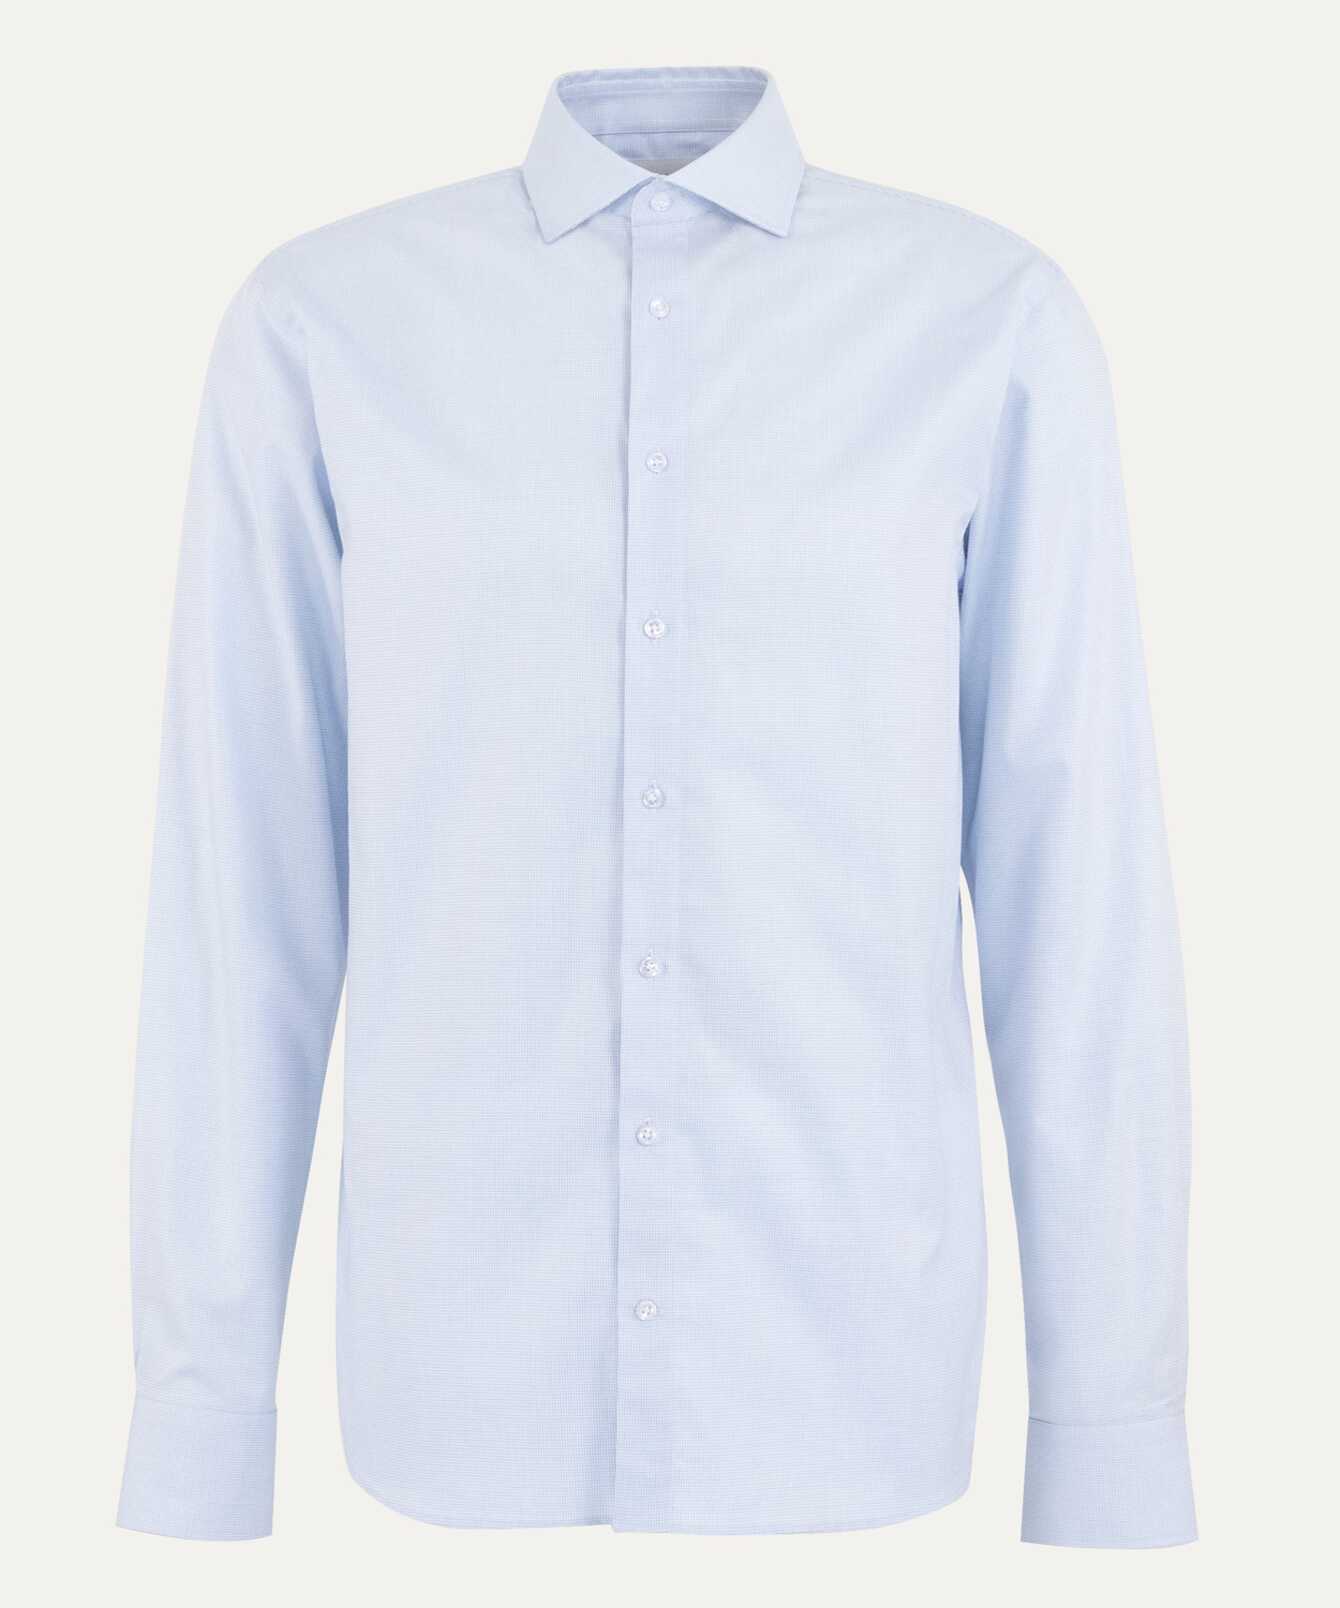 Shirt Stockholm Blue Easy To Iron Twill Shirt Extra Long Sleeve The Shirt Factory